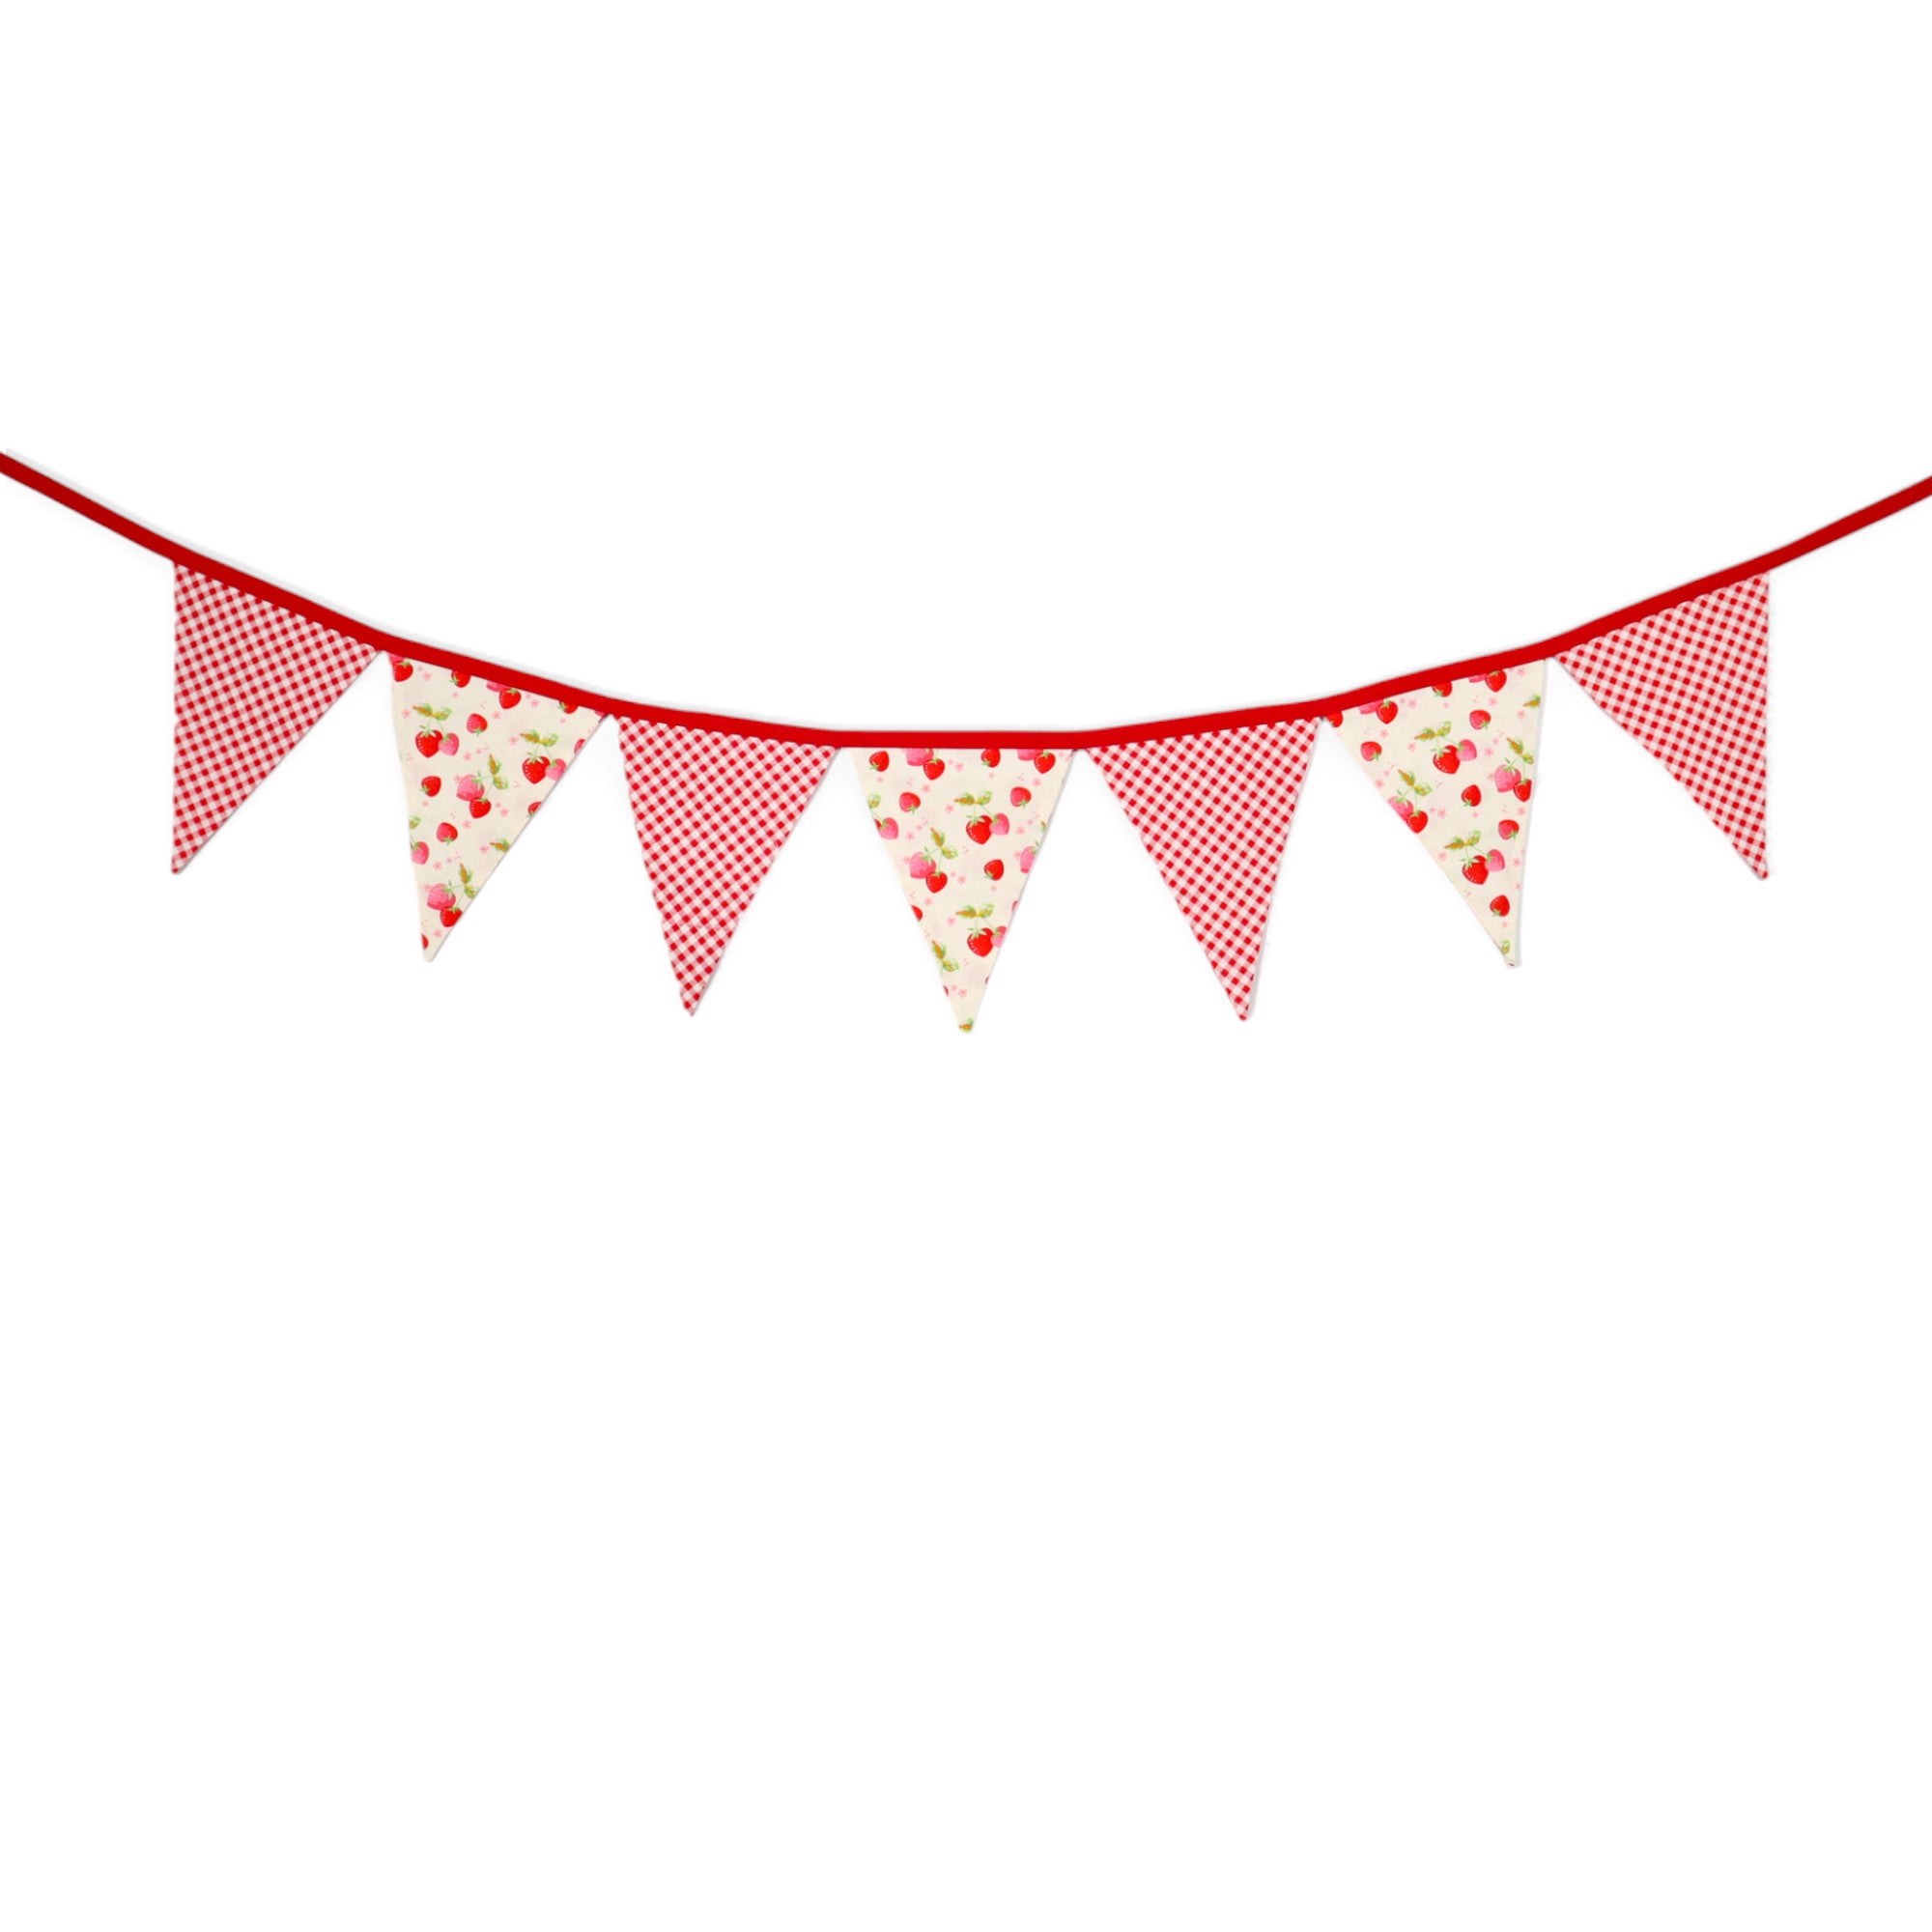 June Strawberries - Crosscut Sewing Co. Pennant Banner Sewing Kit